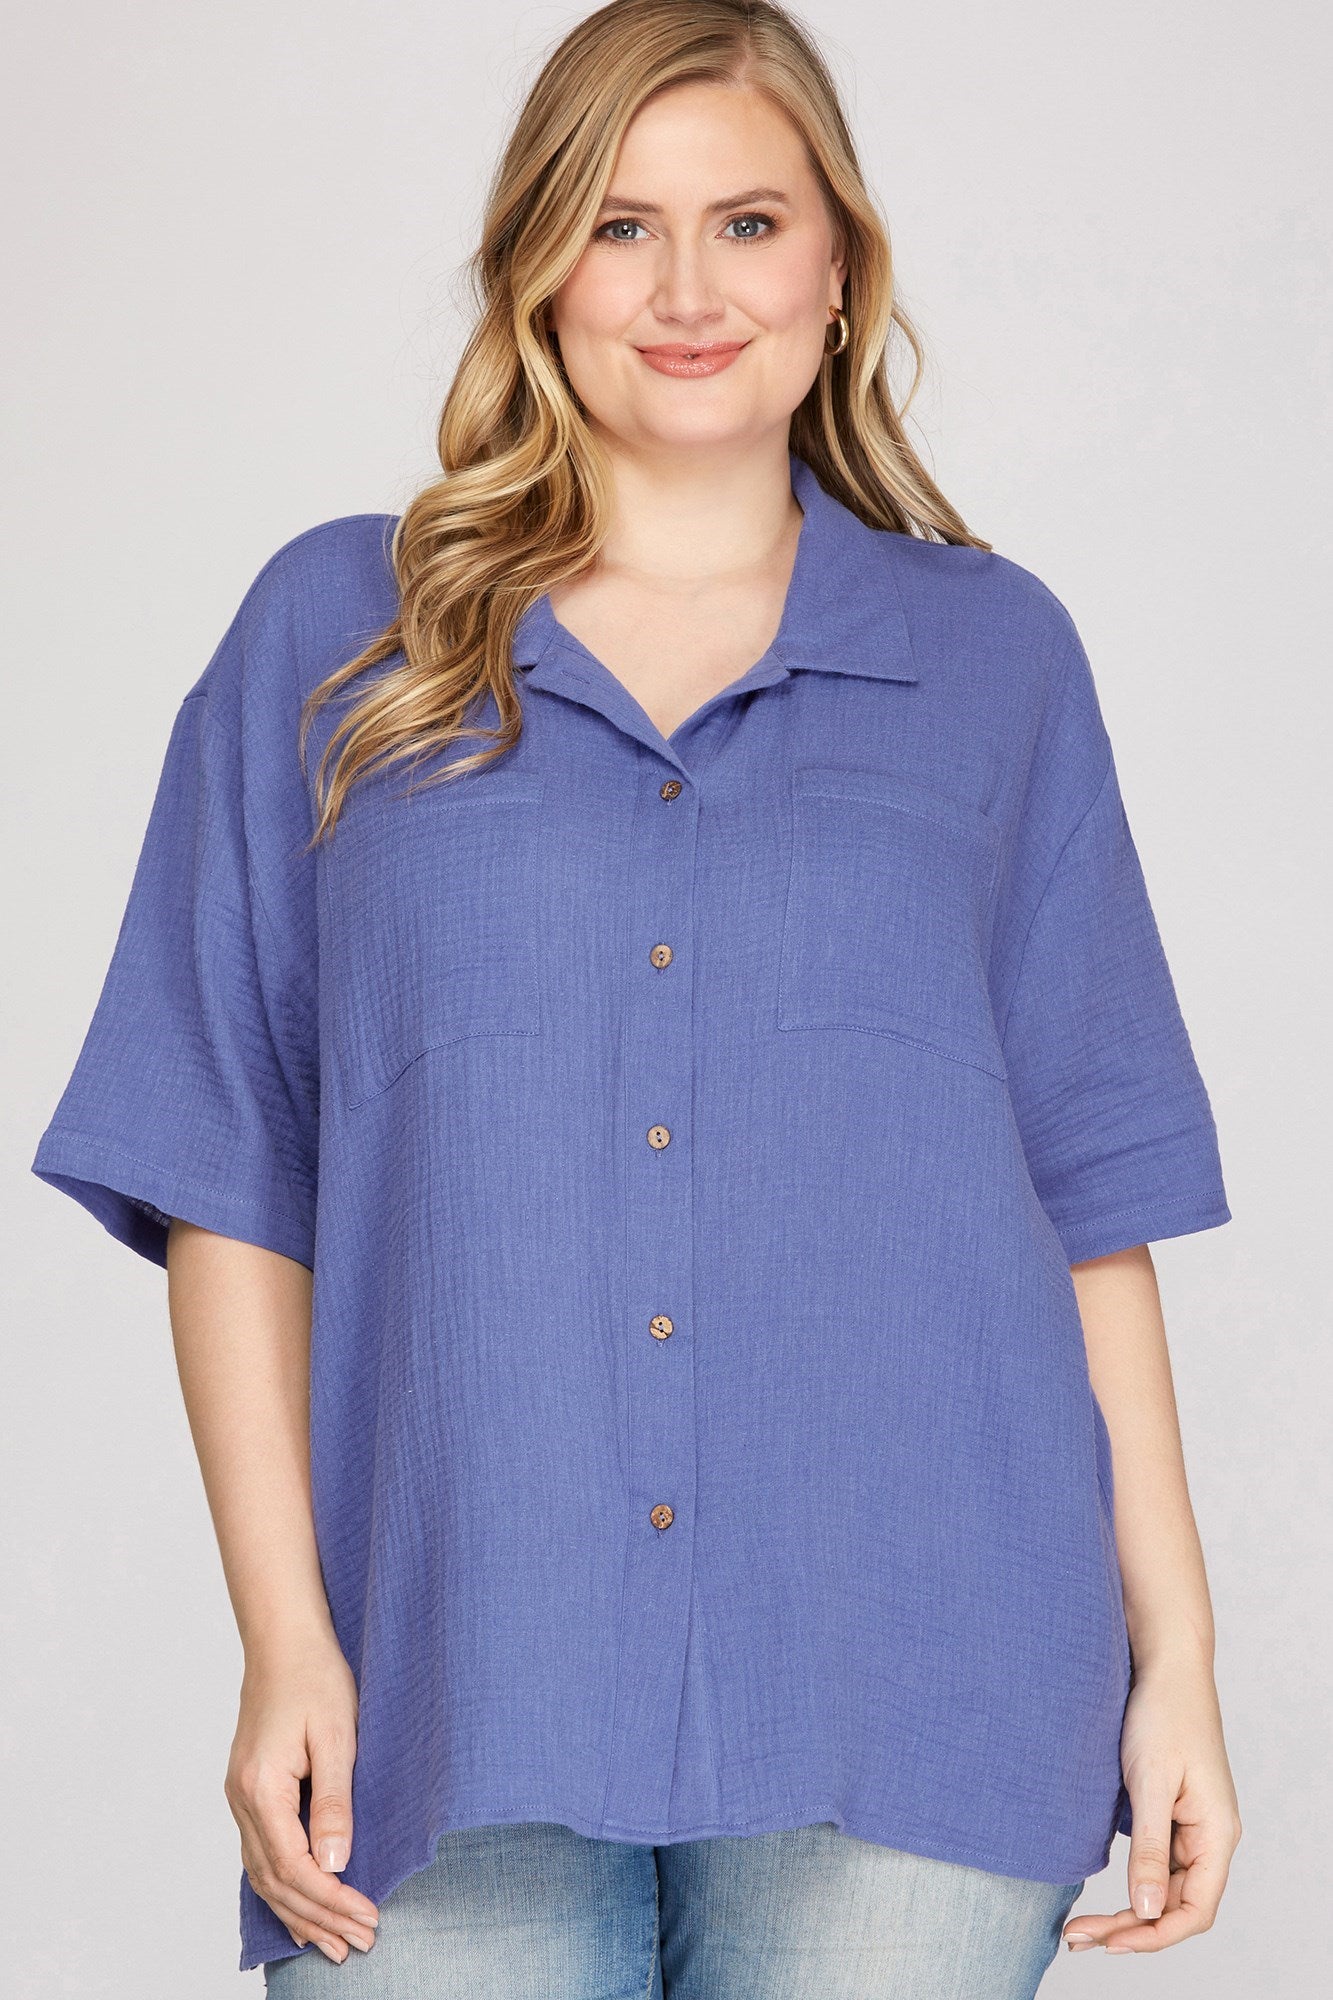 WOVEN BUTTON-DOWN TOP WITH FRON POCKET - BLUE